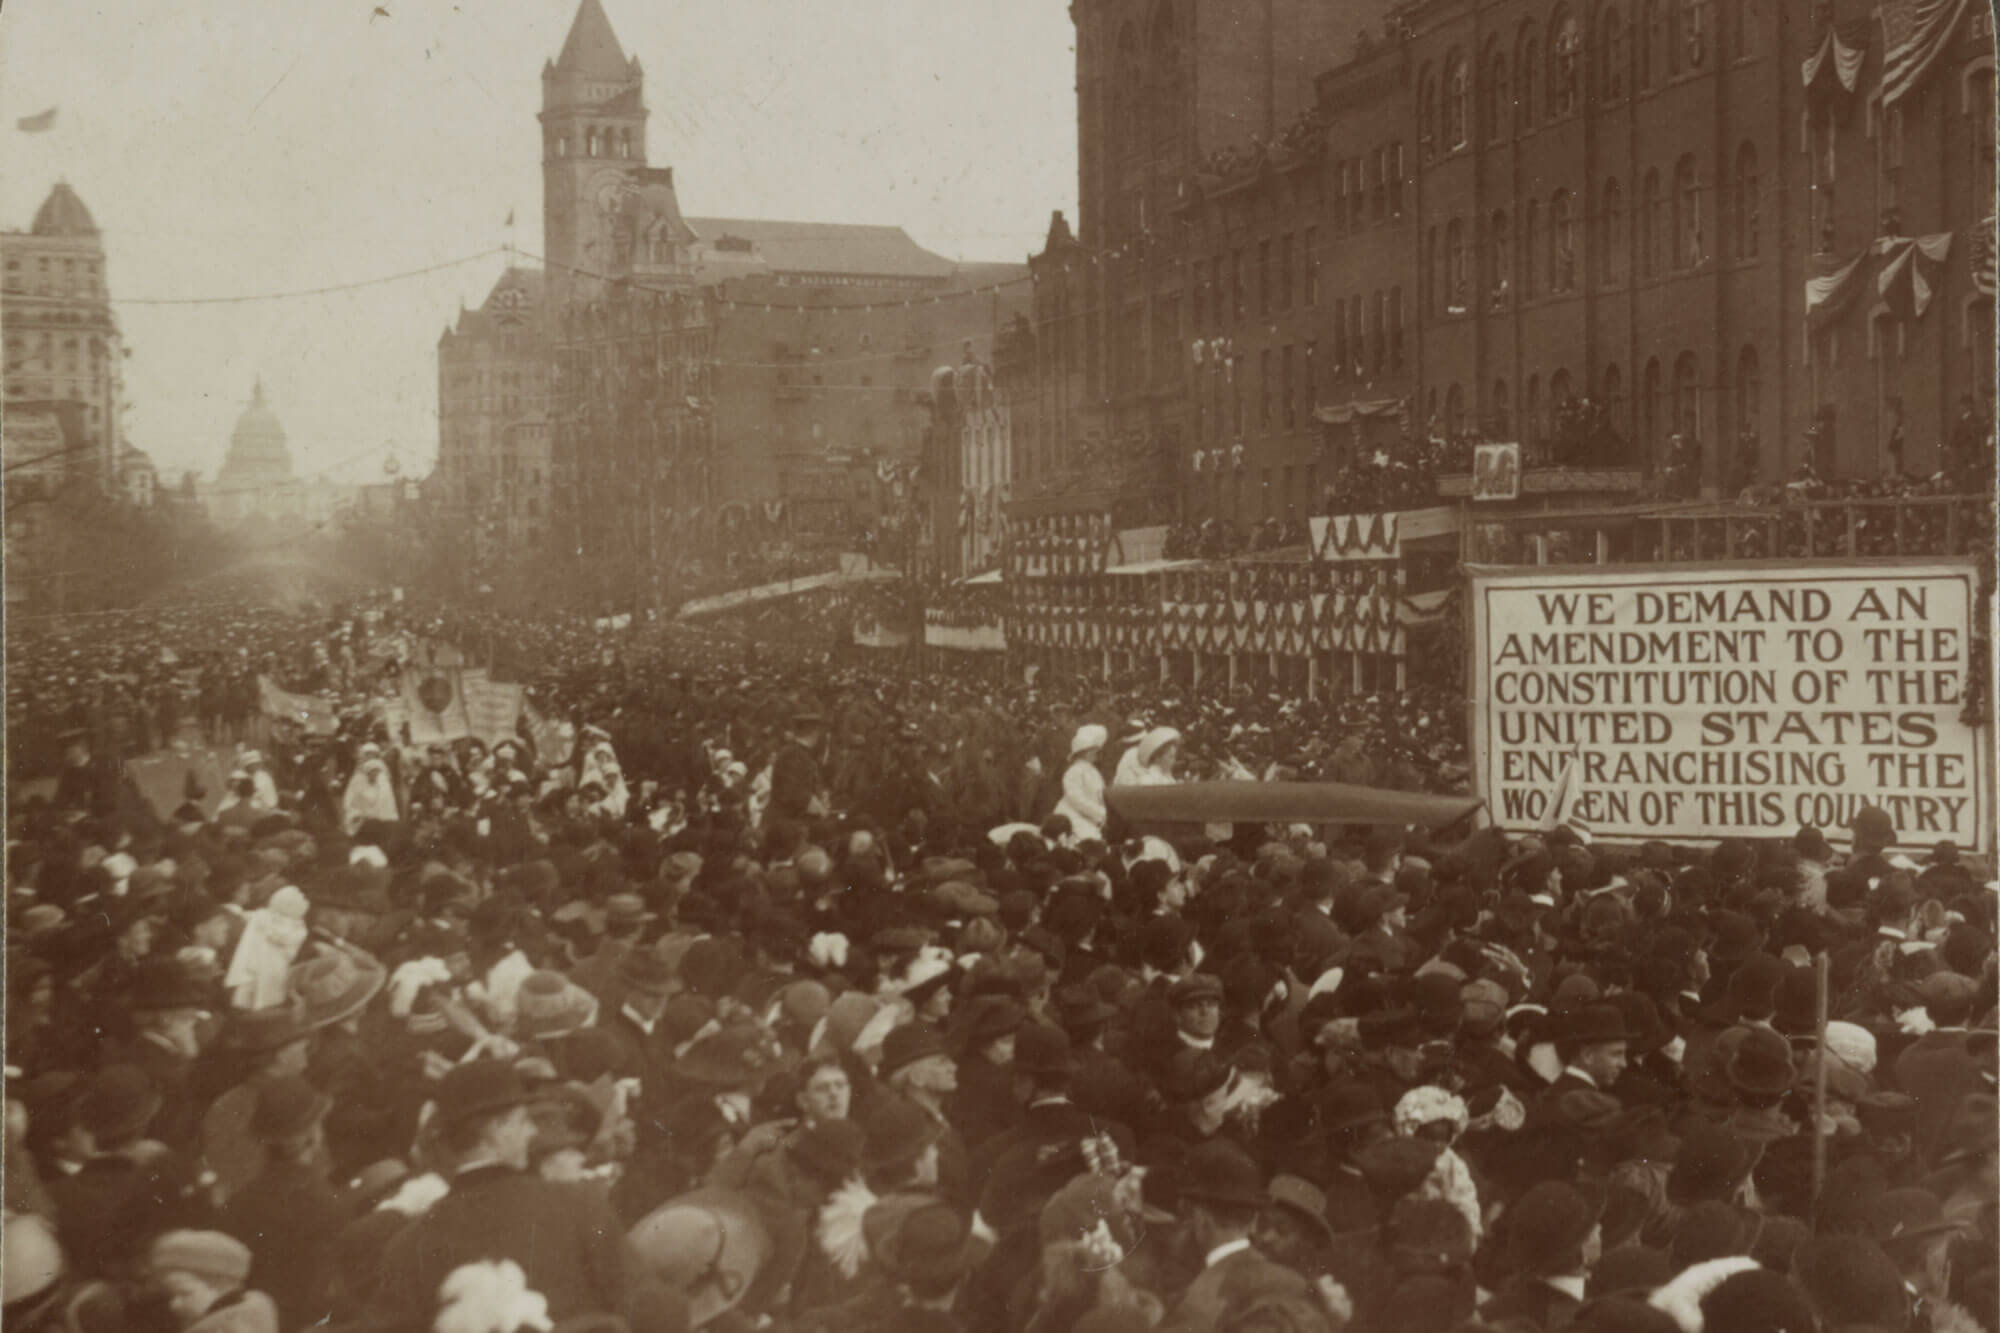 Woman Suffrage Parade, Washington, DC 1913. Collections of the Library of Congress (https://www.loc.gov/item/2013648100/)